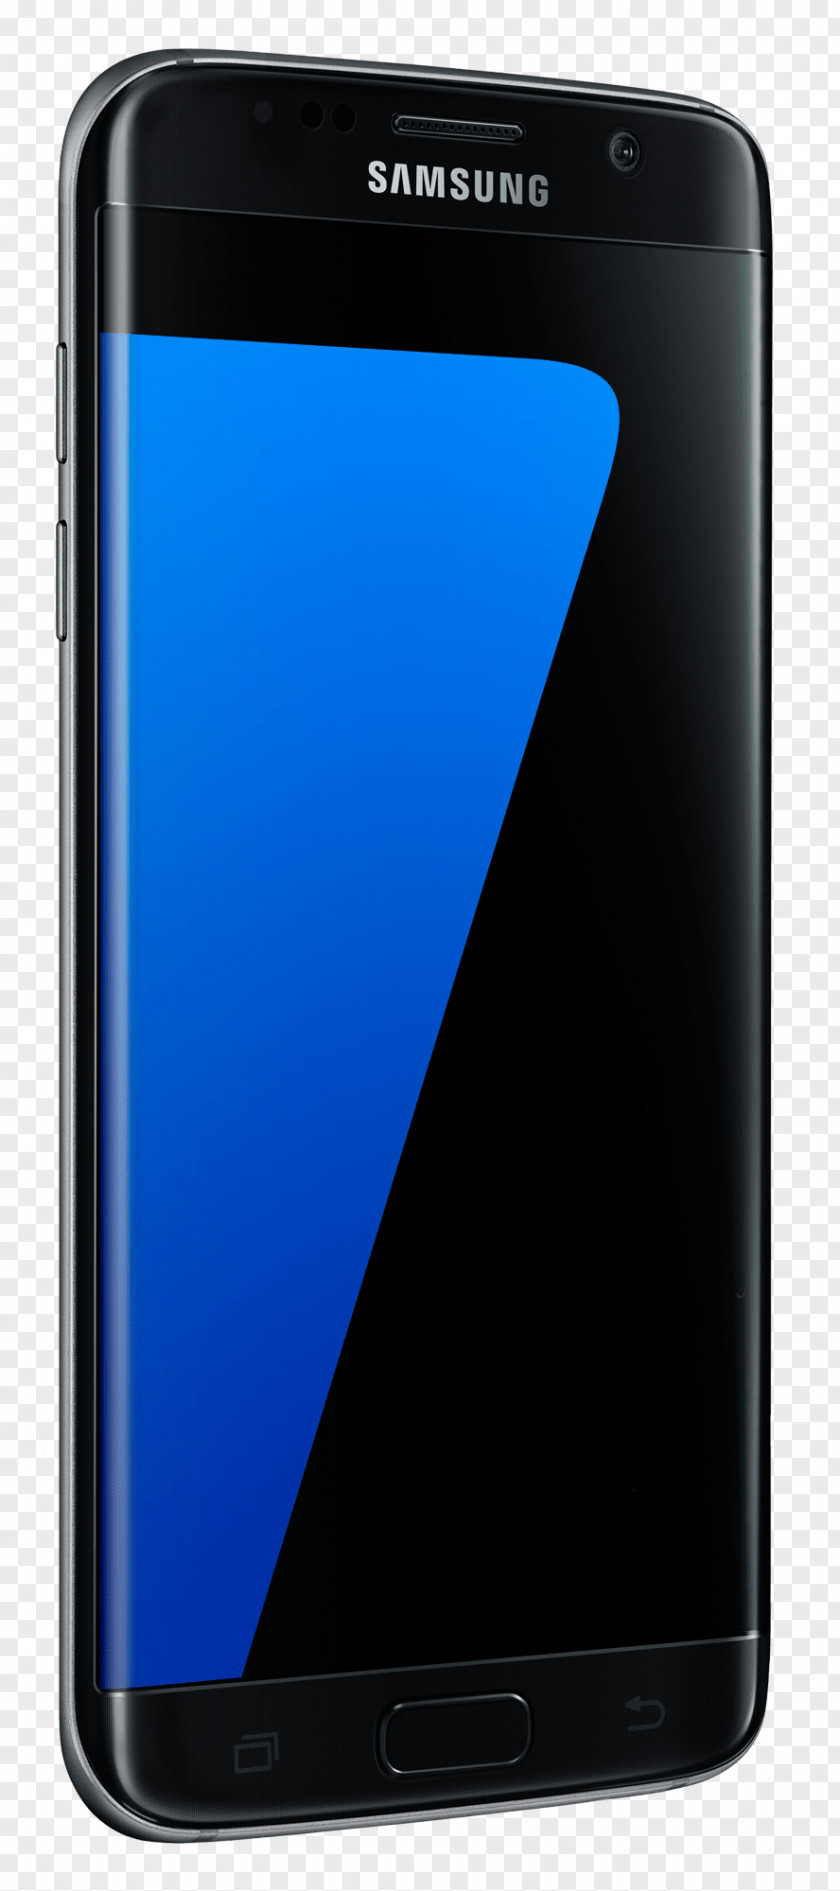 Galaxy S7 Edg Samsung Super AMOLED Smartphone Android Display Device PNG